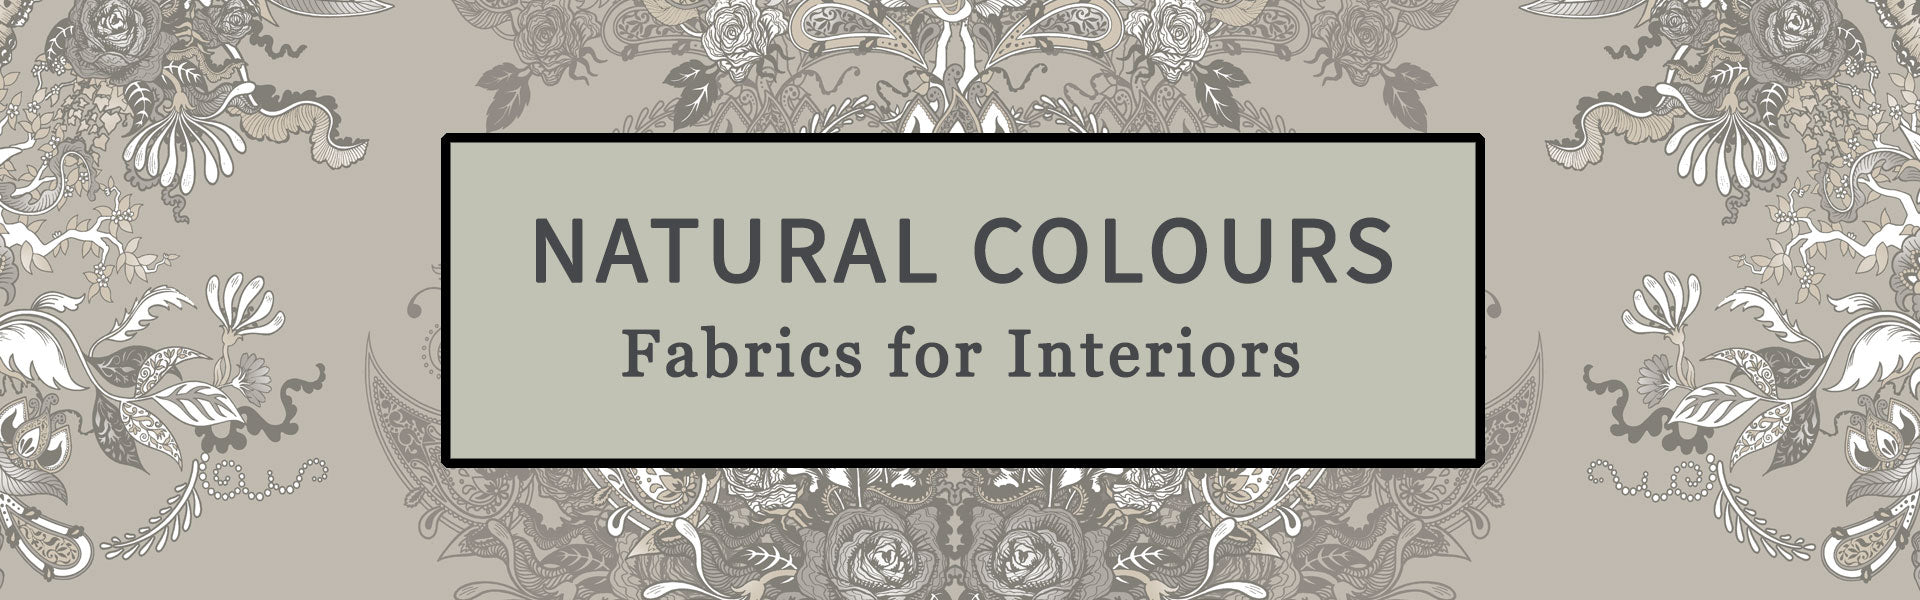 Natural Colours Fabric for Interiors, Upholstery, Curtains & Soft Furnishings by Designer, Becca Who